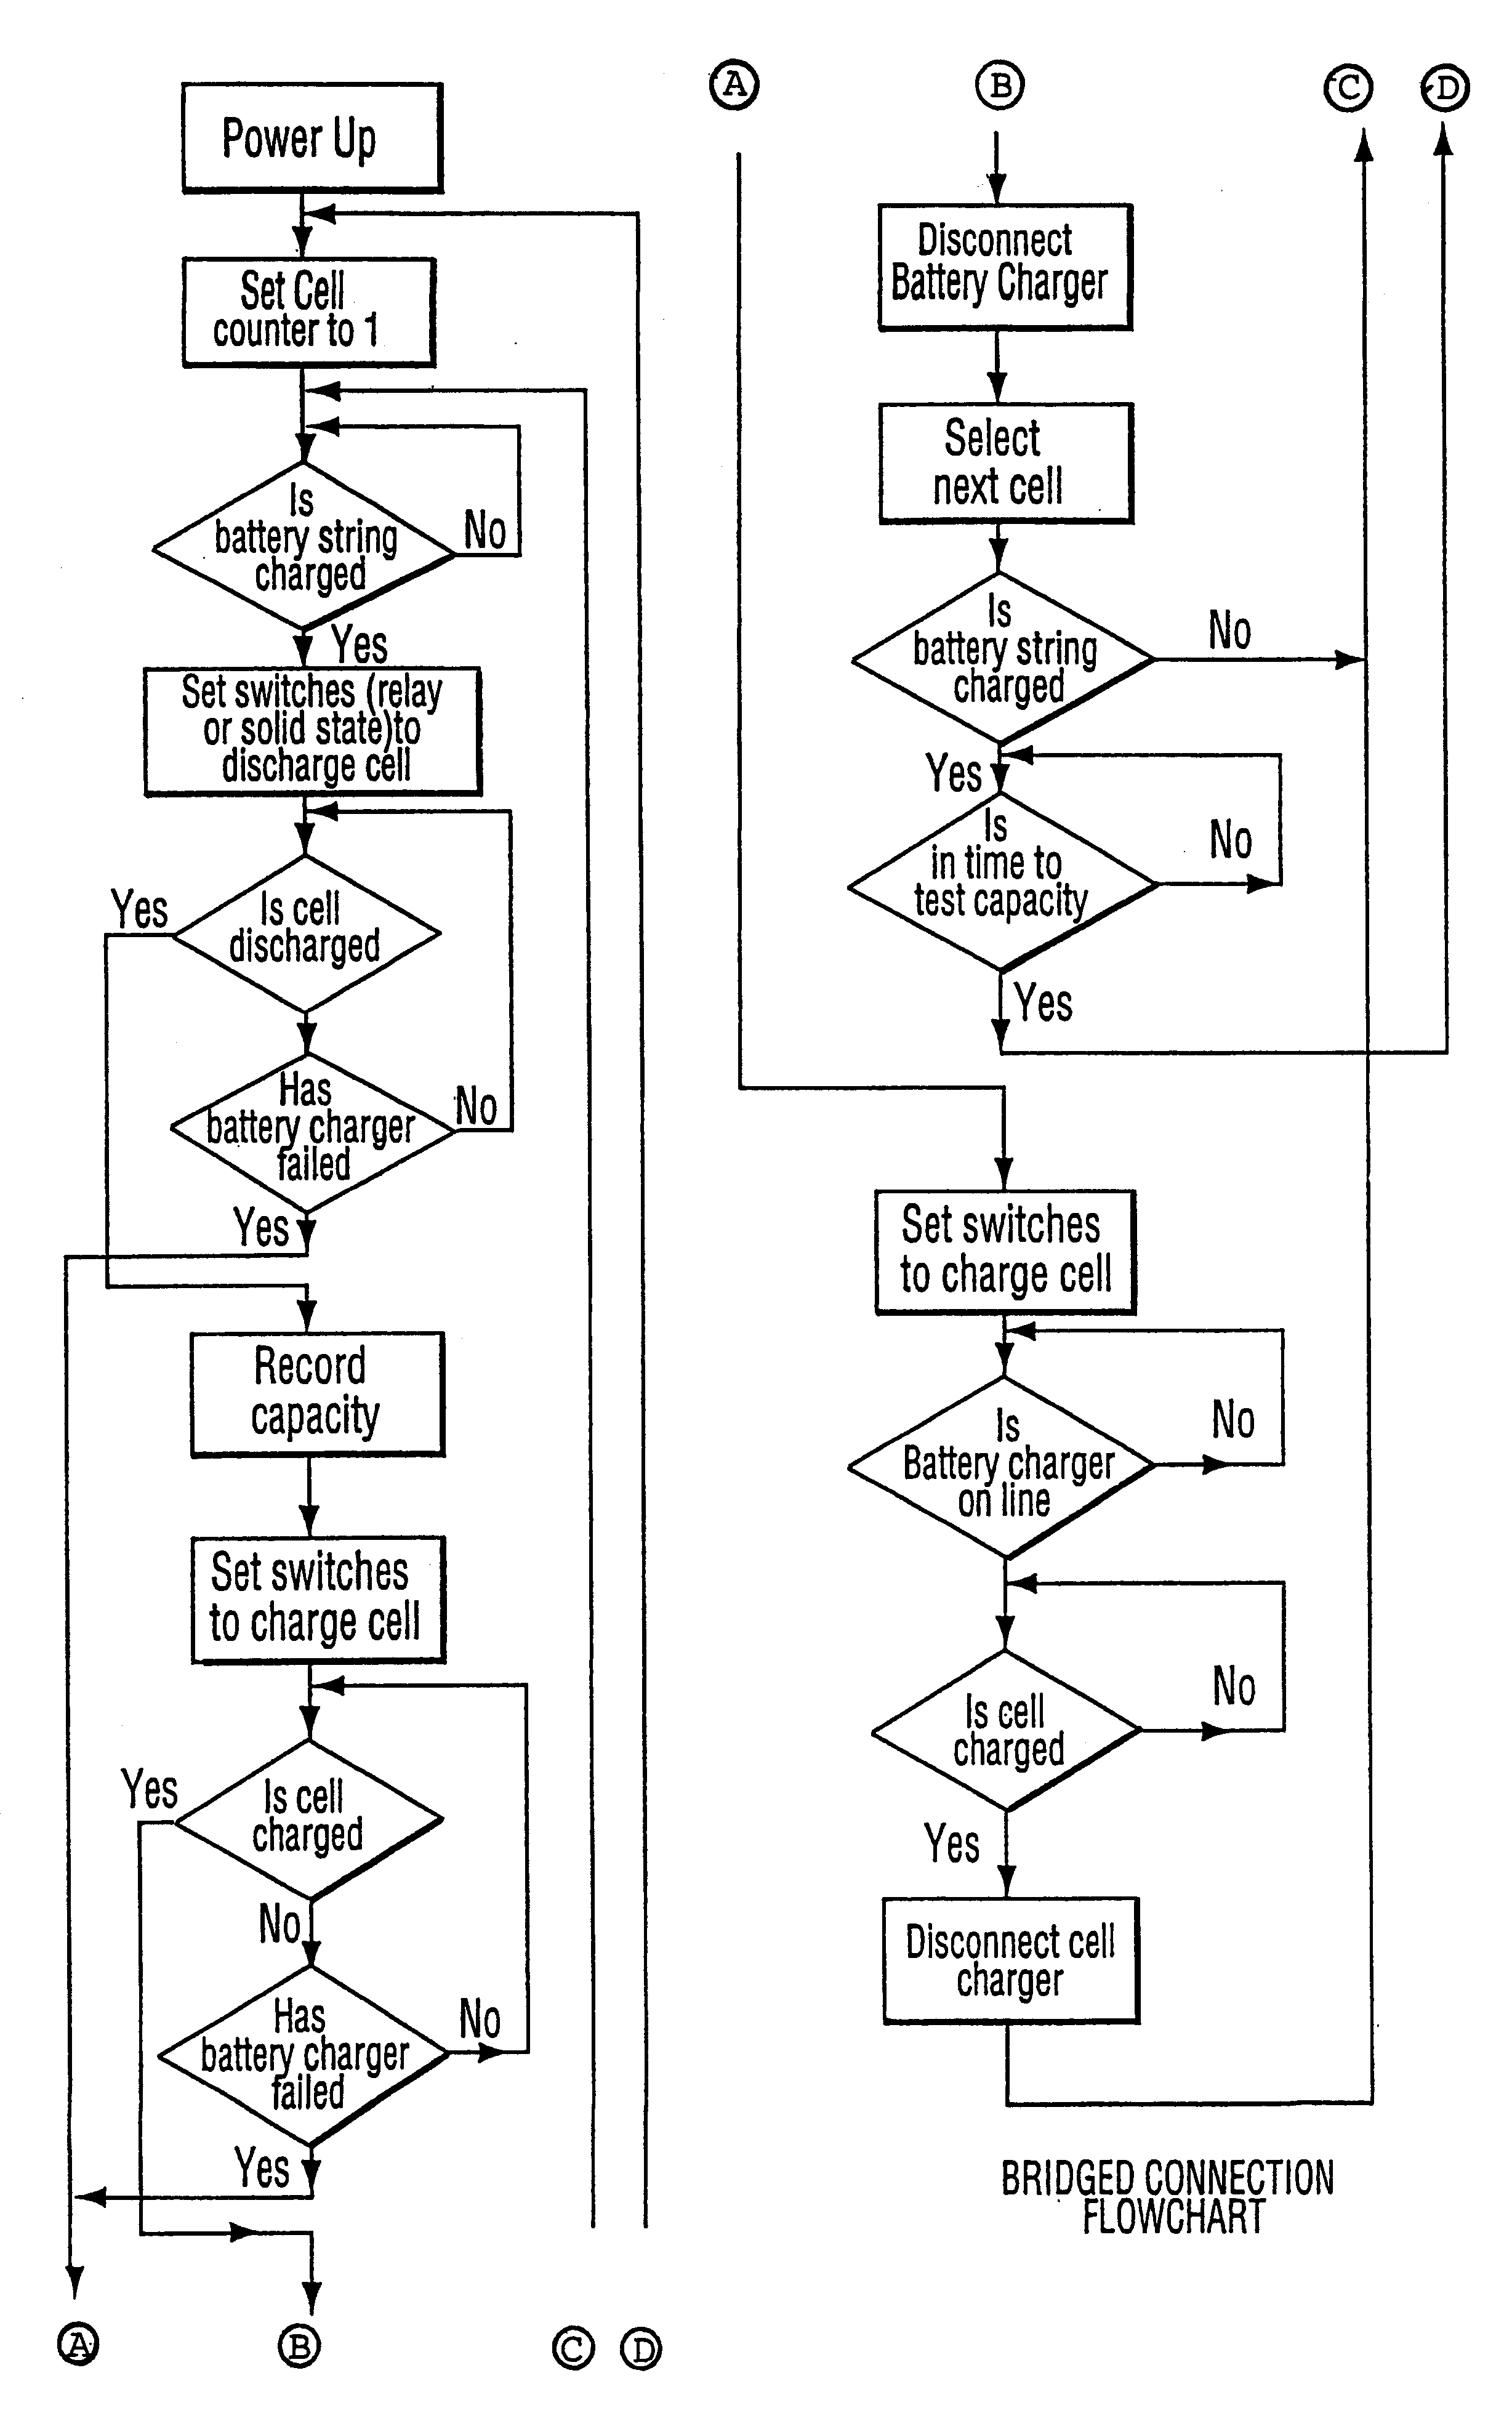 Device for managing battery packs by selectively monitoring and assessing the operative capacity of the battery modules in the pack